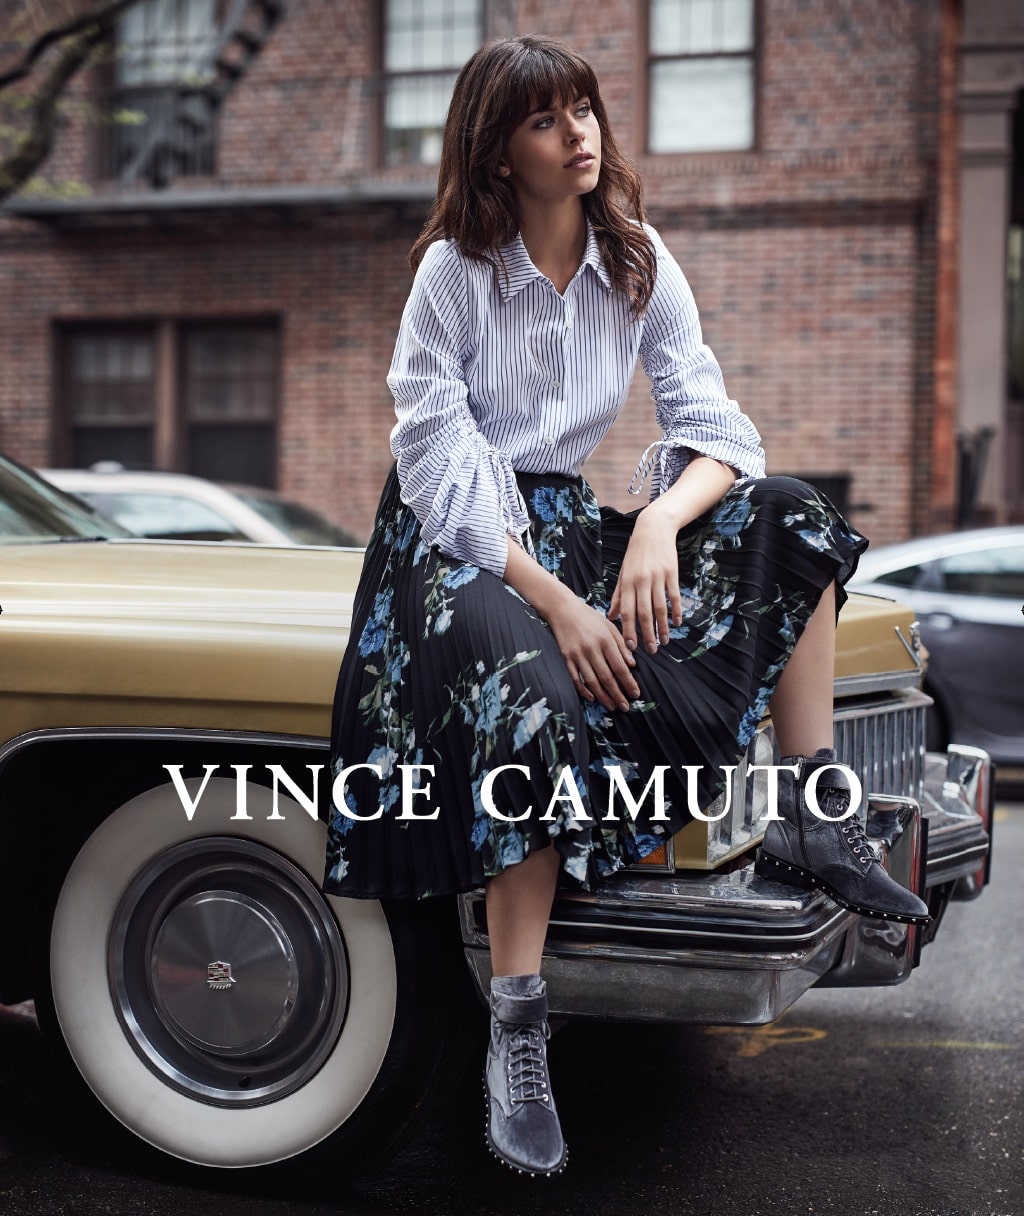 16 Passionate Quotes From Legendary Fashion Designer, Vince Camuto –  Monet360° Fashion. Inspired.